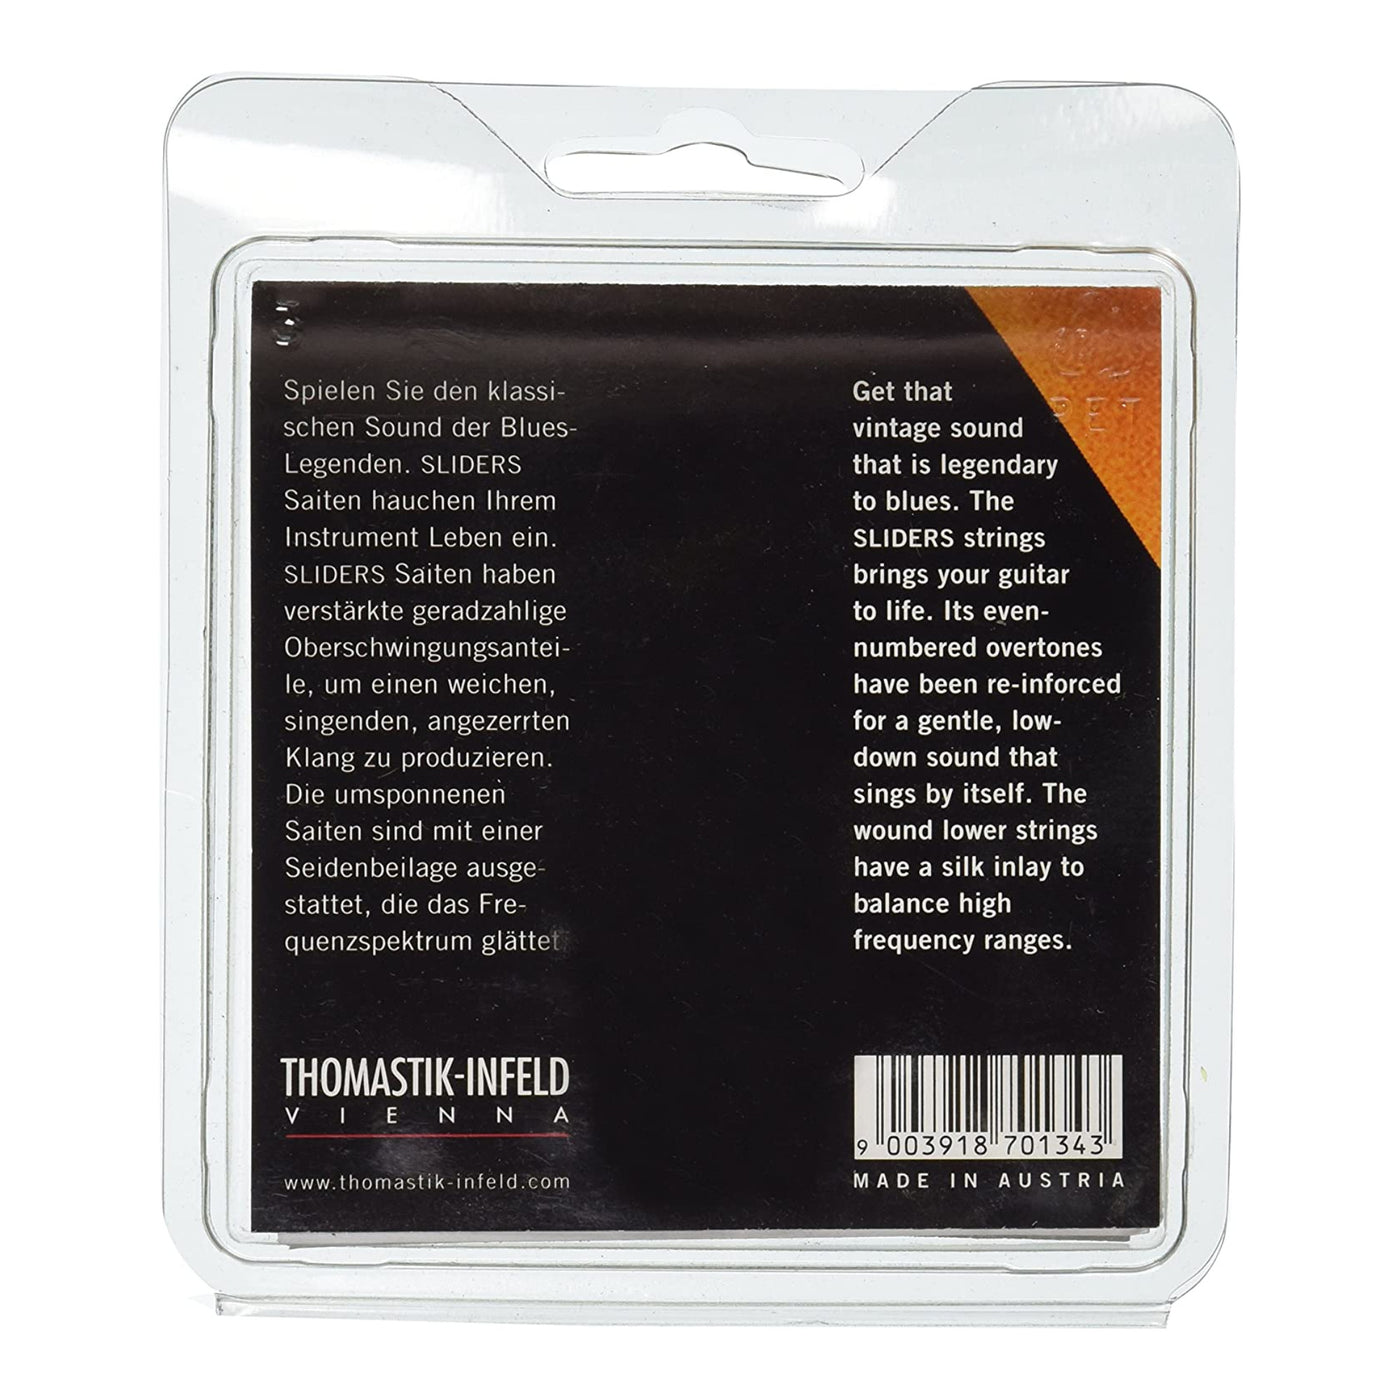 Thomastik-Infeld SL109 Electric Guitar Strings, Sliders Blues 6 String Set with Round Wound Nickel E, B, G, D, A, E Set